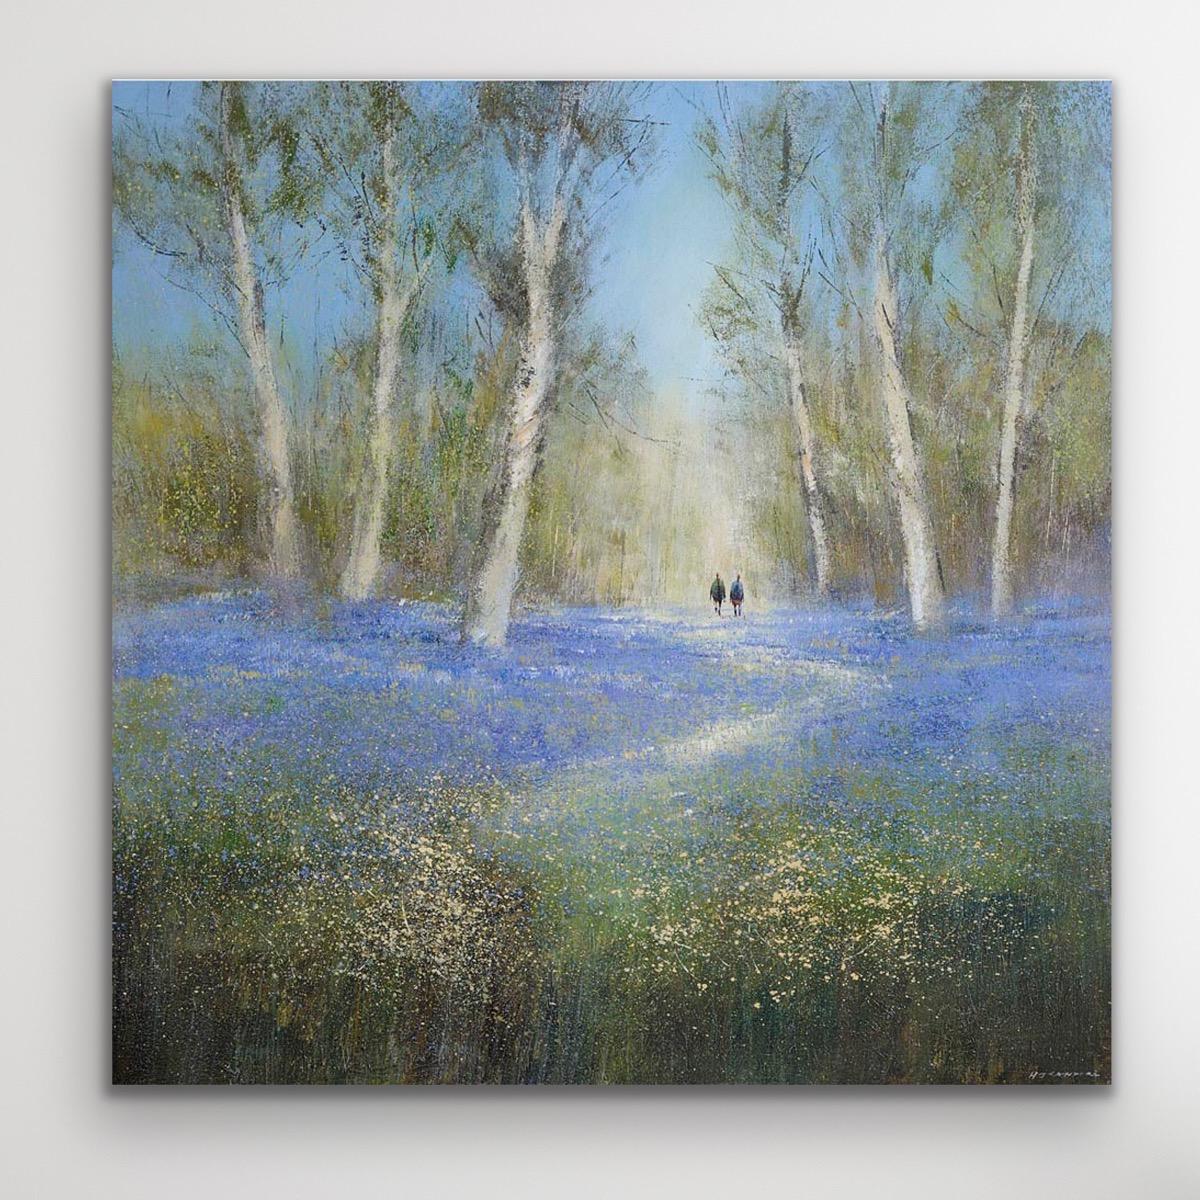 These stunning prints are created using fine art archival quality inks and canvas with three layers of UV varnish to protect the artwork and enhance the colours. These deep edge box canvases are printed around the edges to lend a contemporary feel